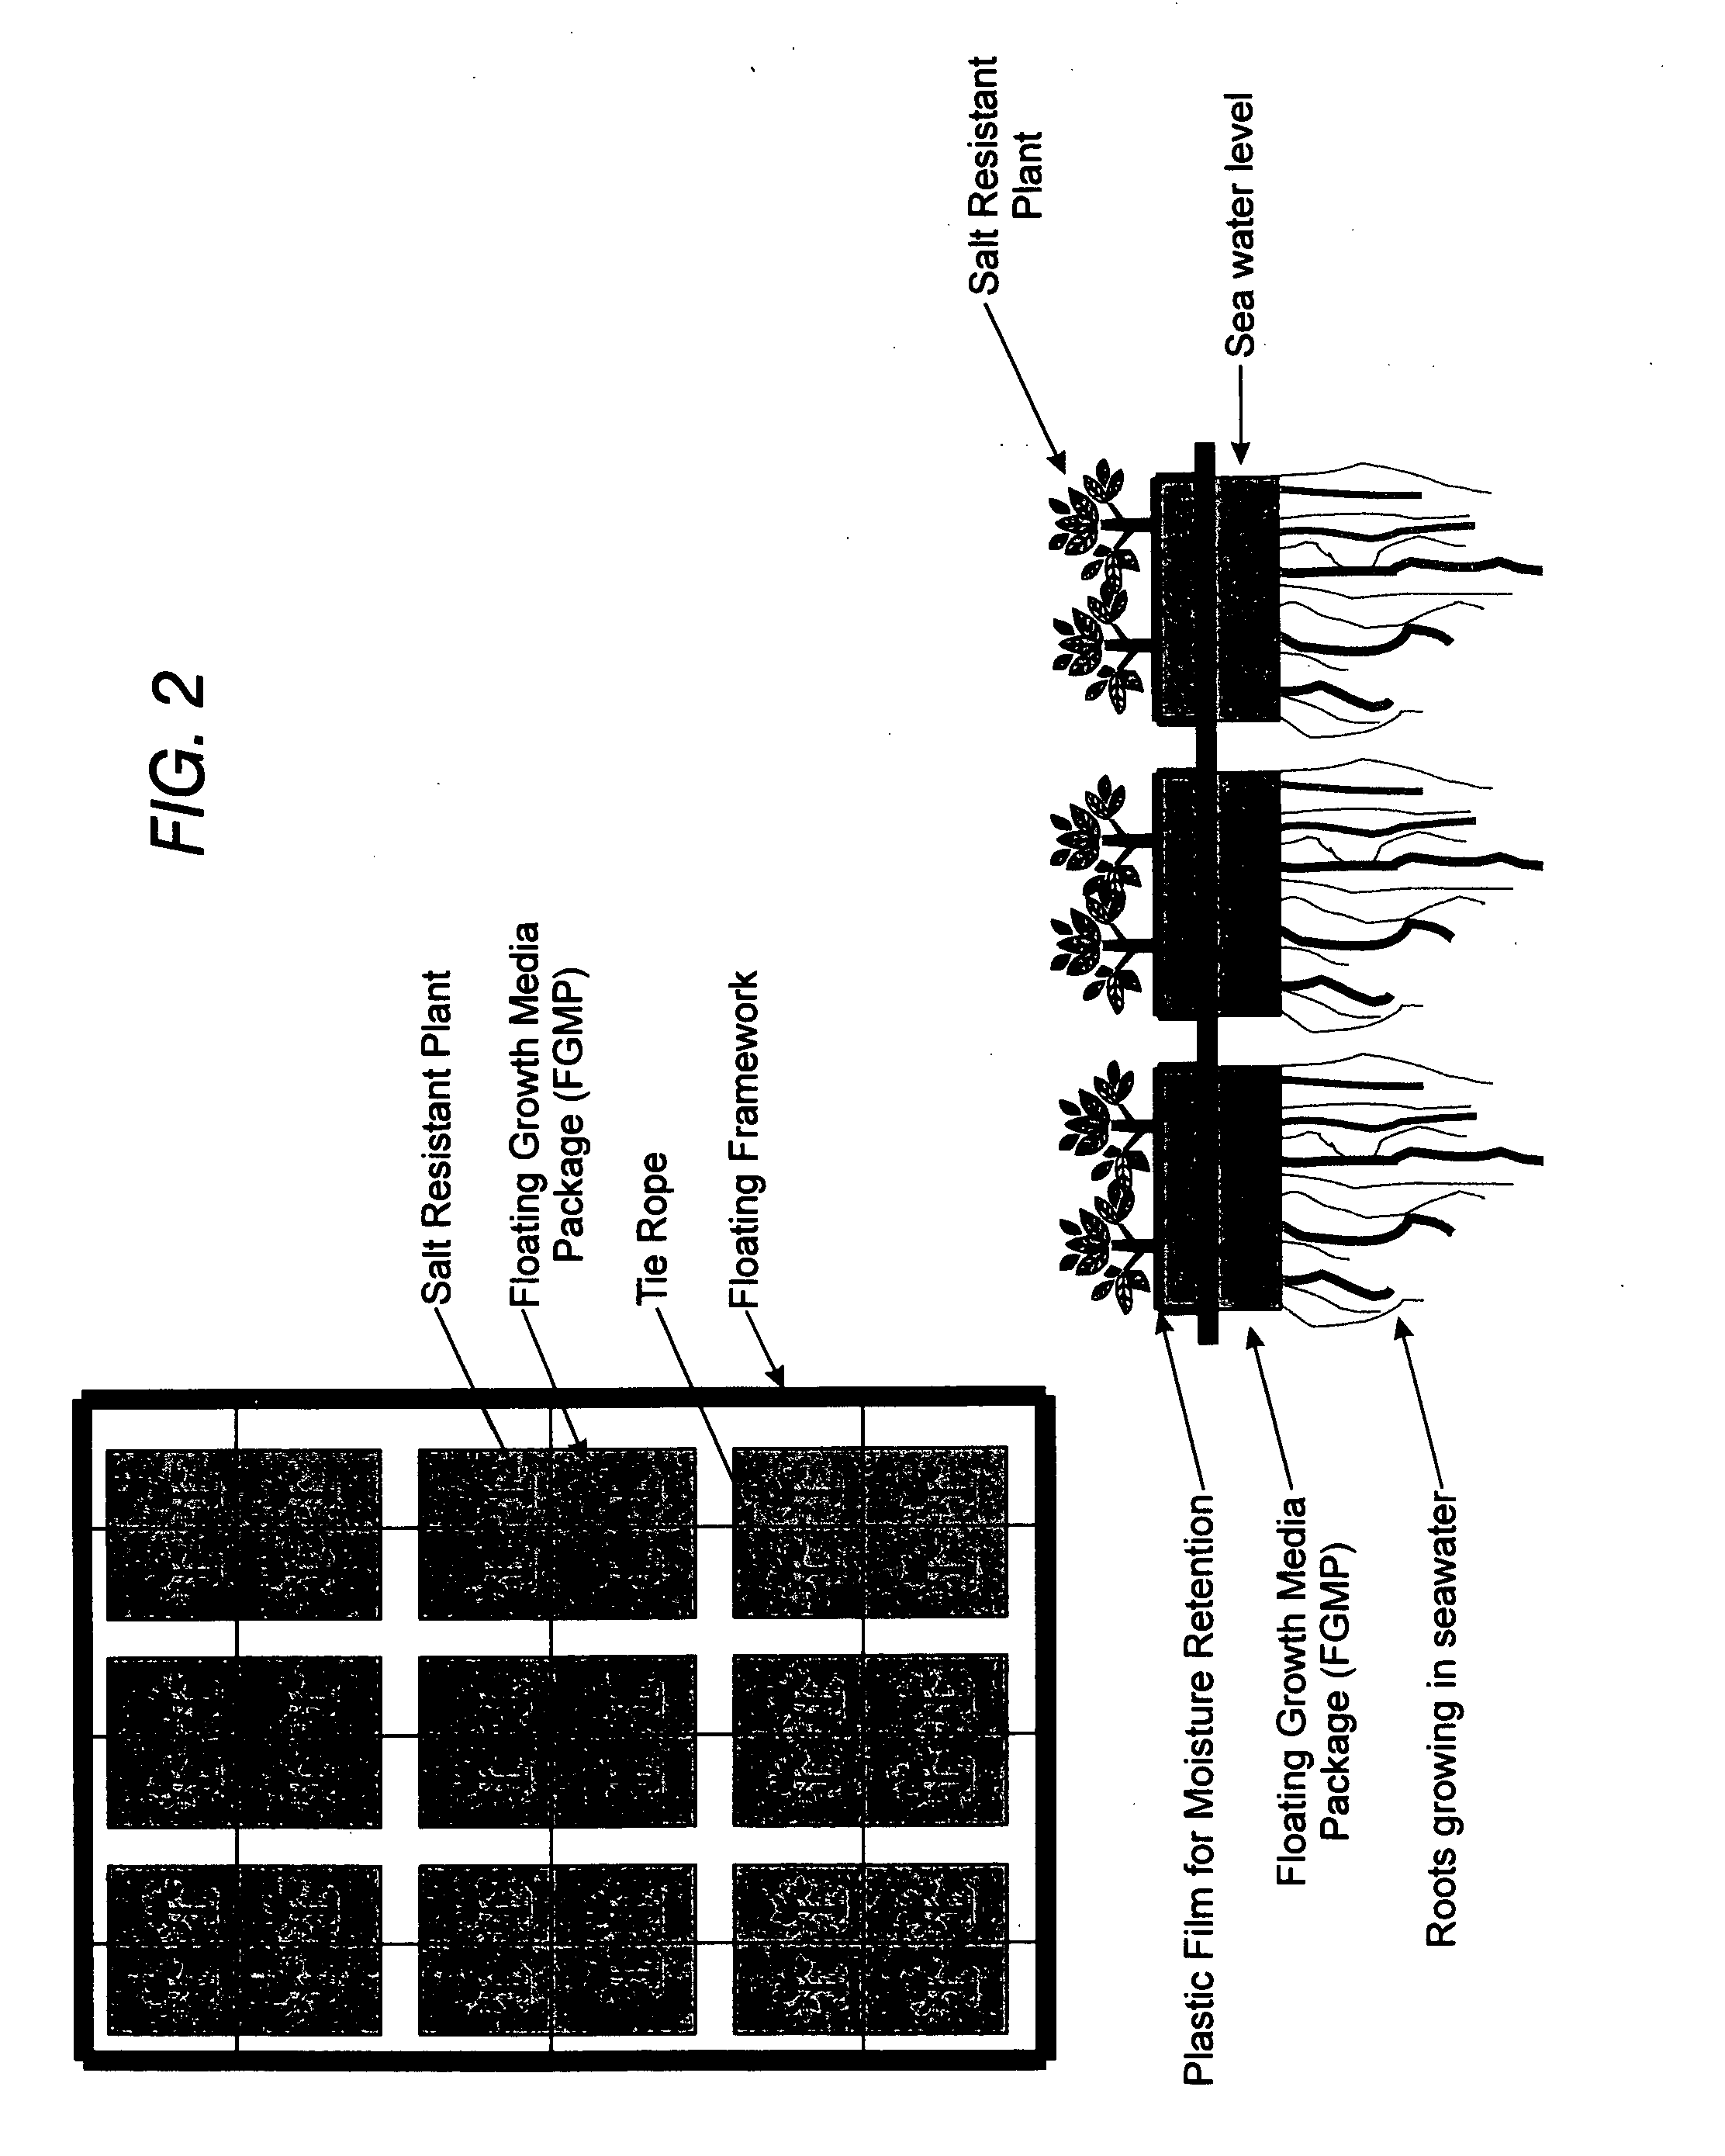 Floating plant cultivation platform and method for growing terrestrial plants in saline water of various salinities for multiple purposes